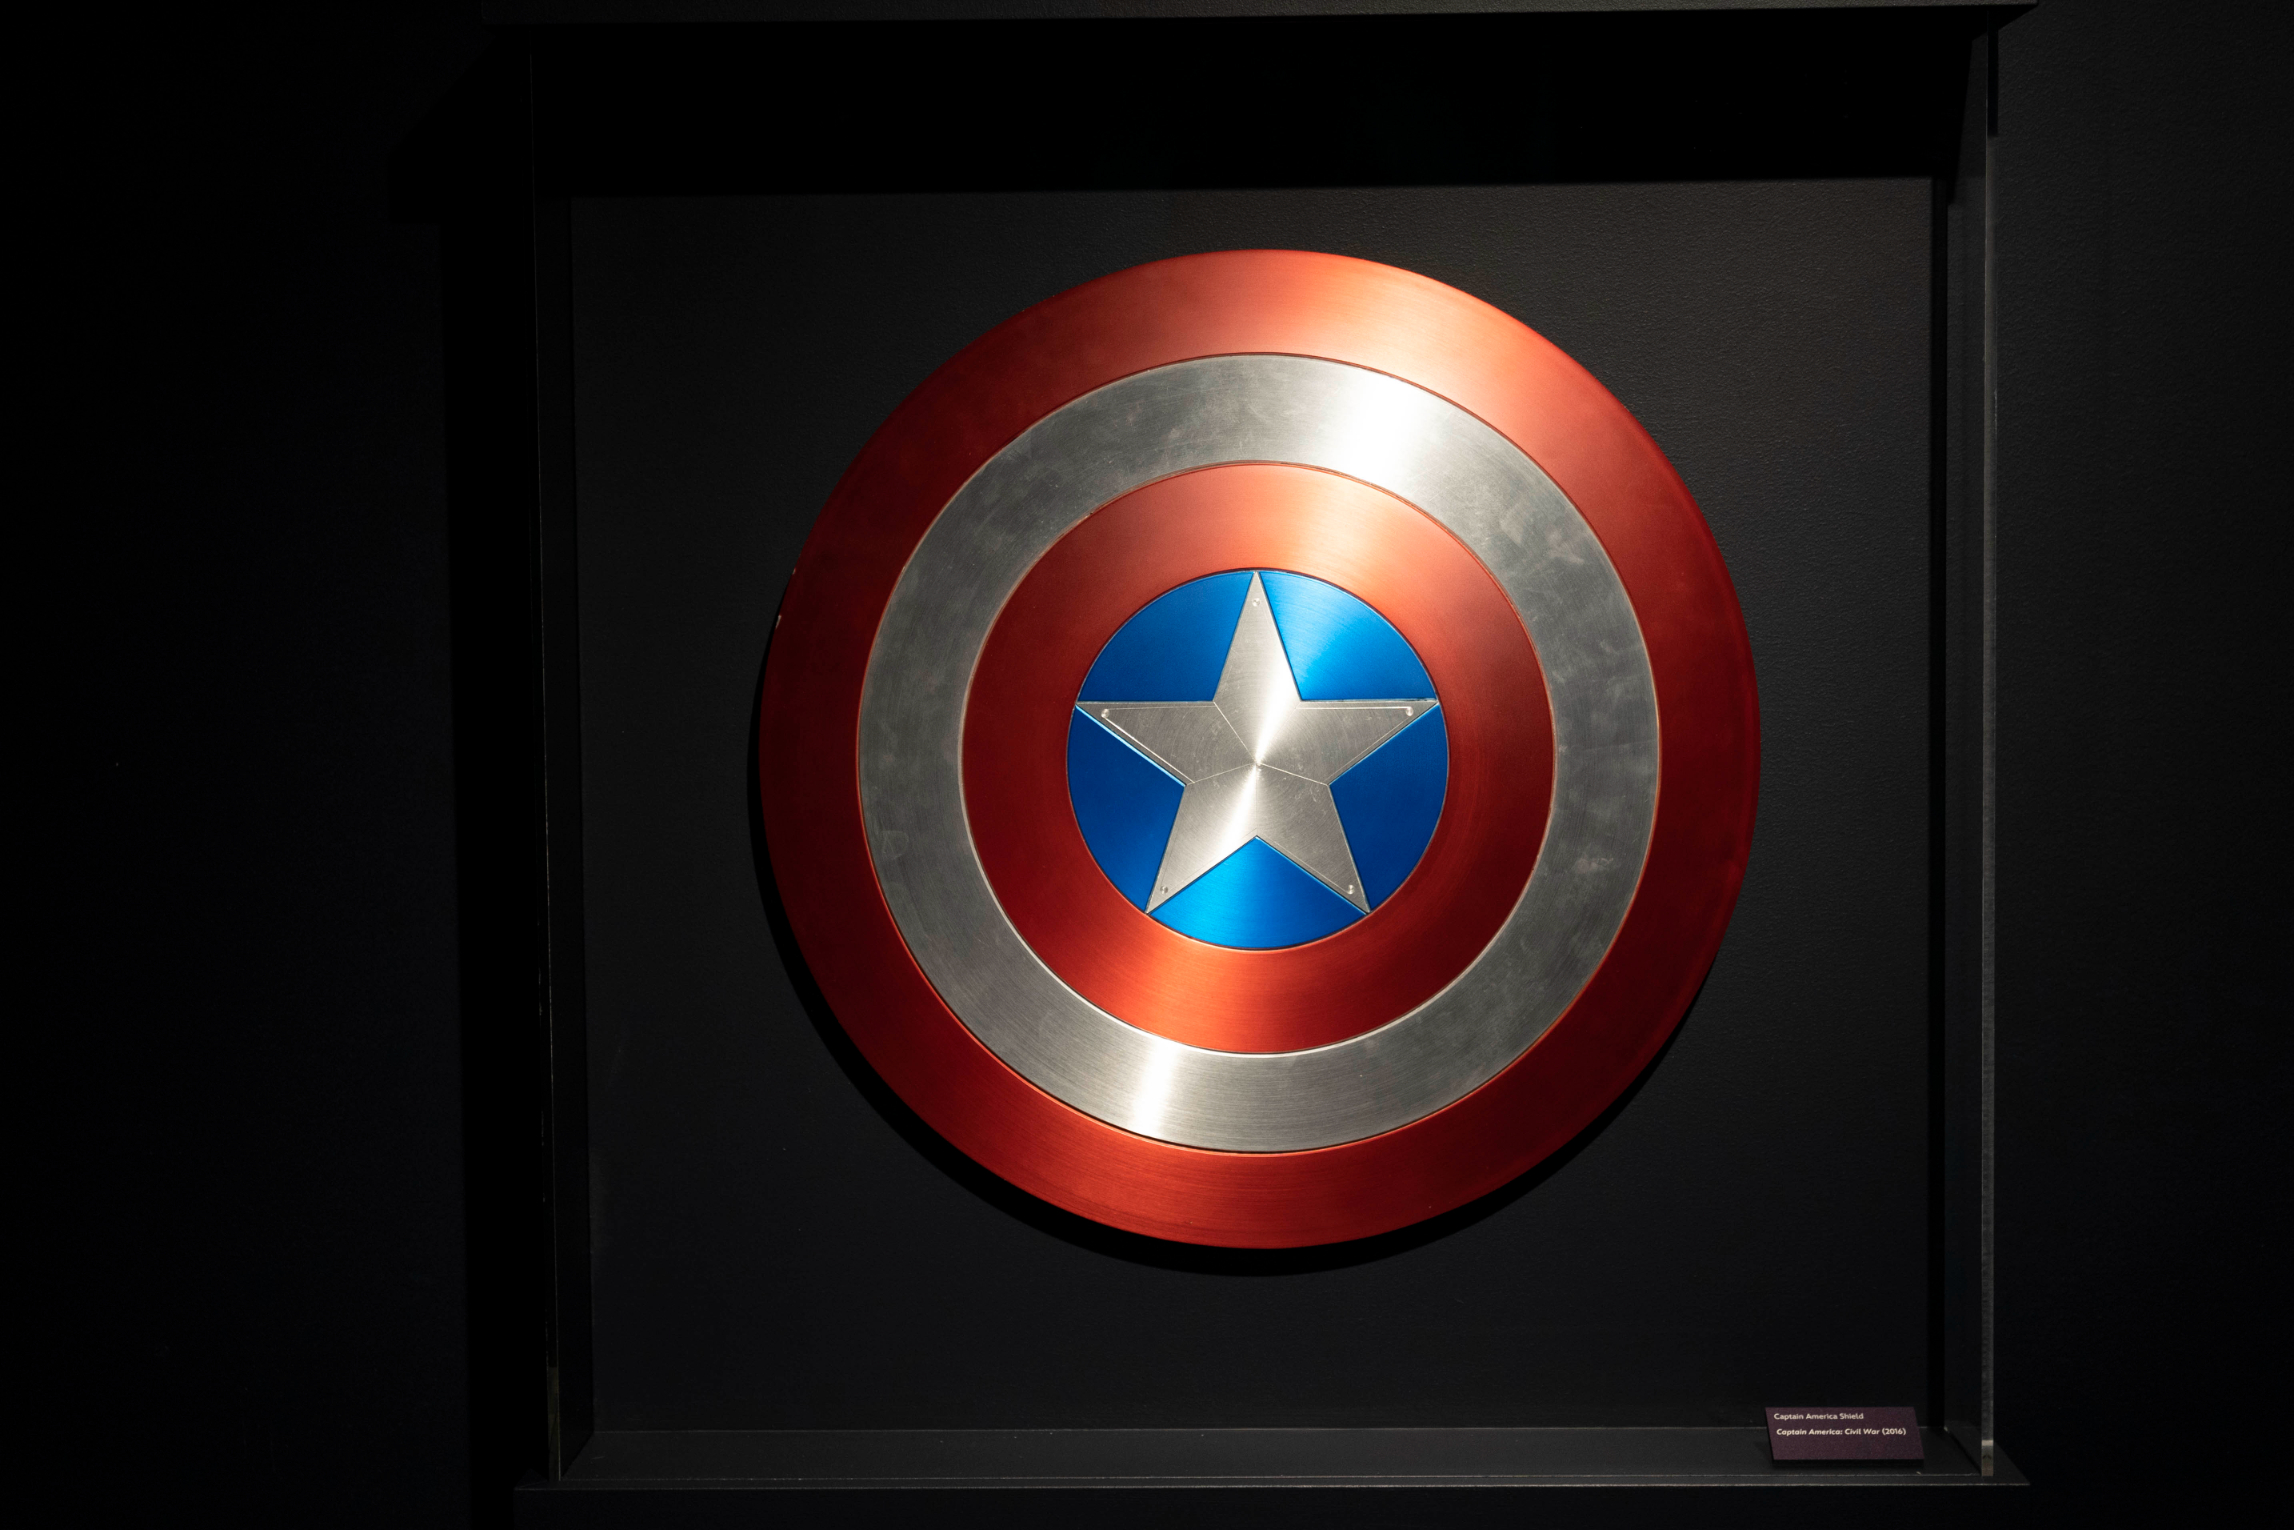 Captain America shield used in Captain America: Civil War (2016) on display at Disney100: The Exhibition, now open at The Franklin Institute in Philadelphia. ©MARVEL